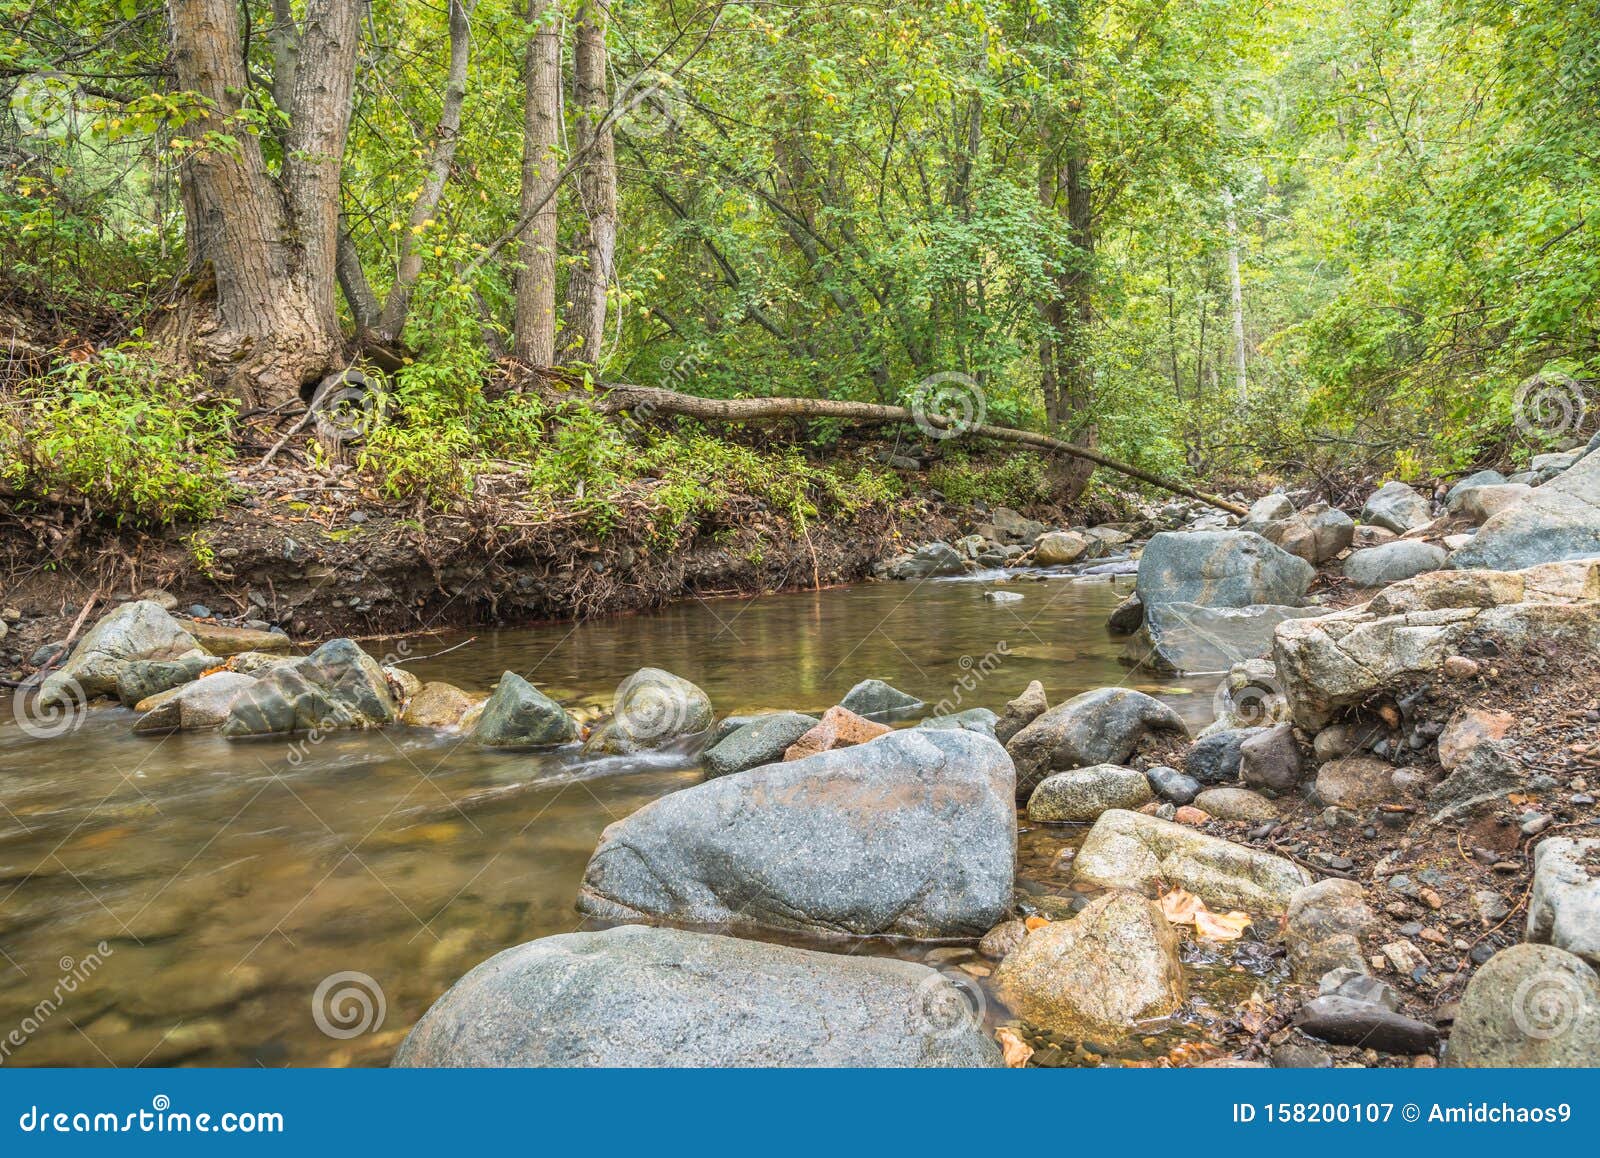 Small Creek With Rocky Shoreline Flowing Through Forest Stock Image